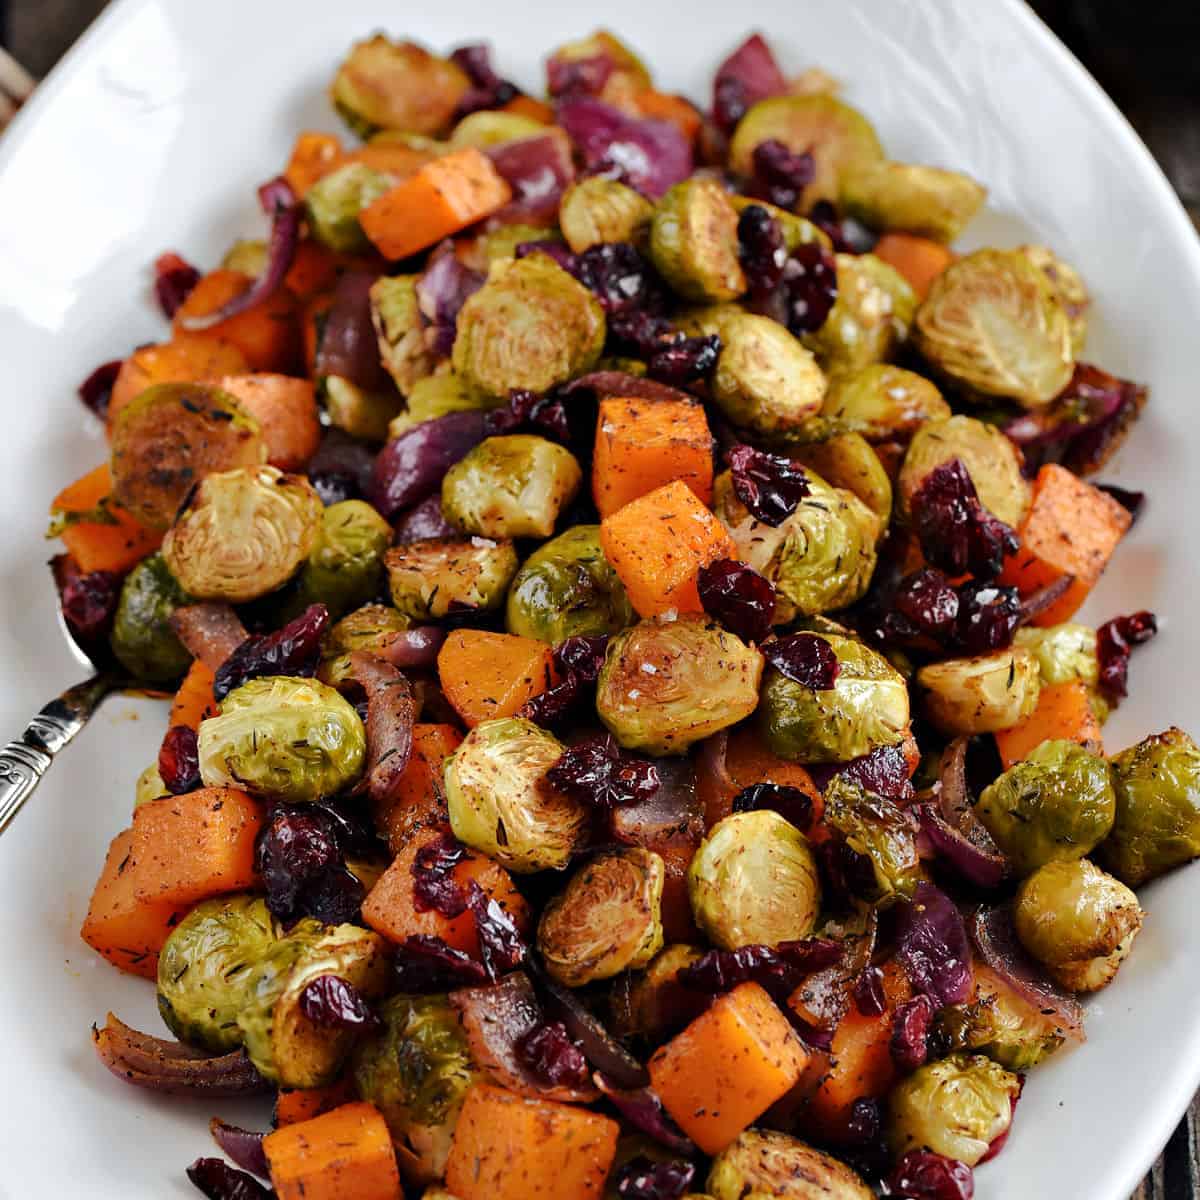 Roasted Brussels Sprouts and Squash with dried Cranberries